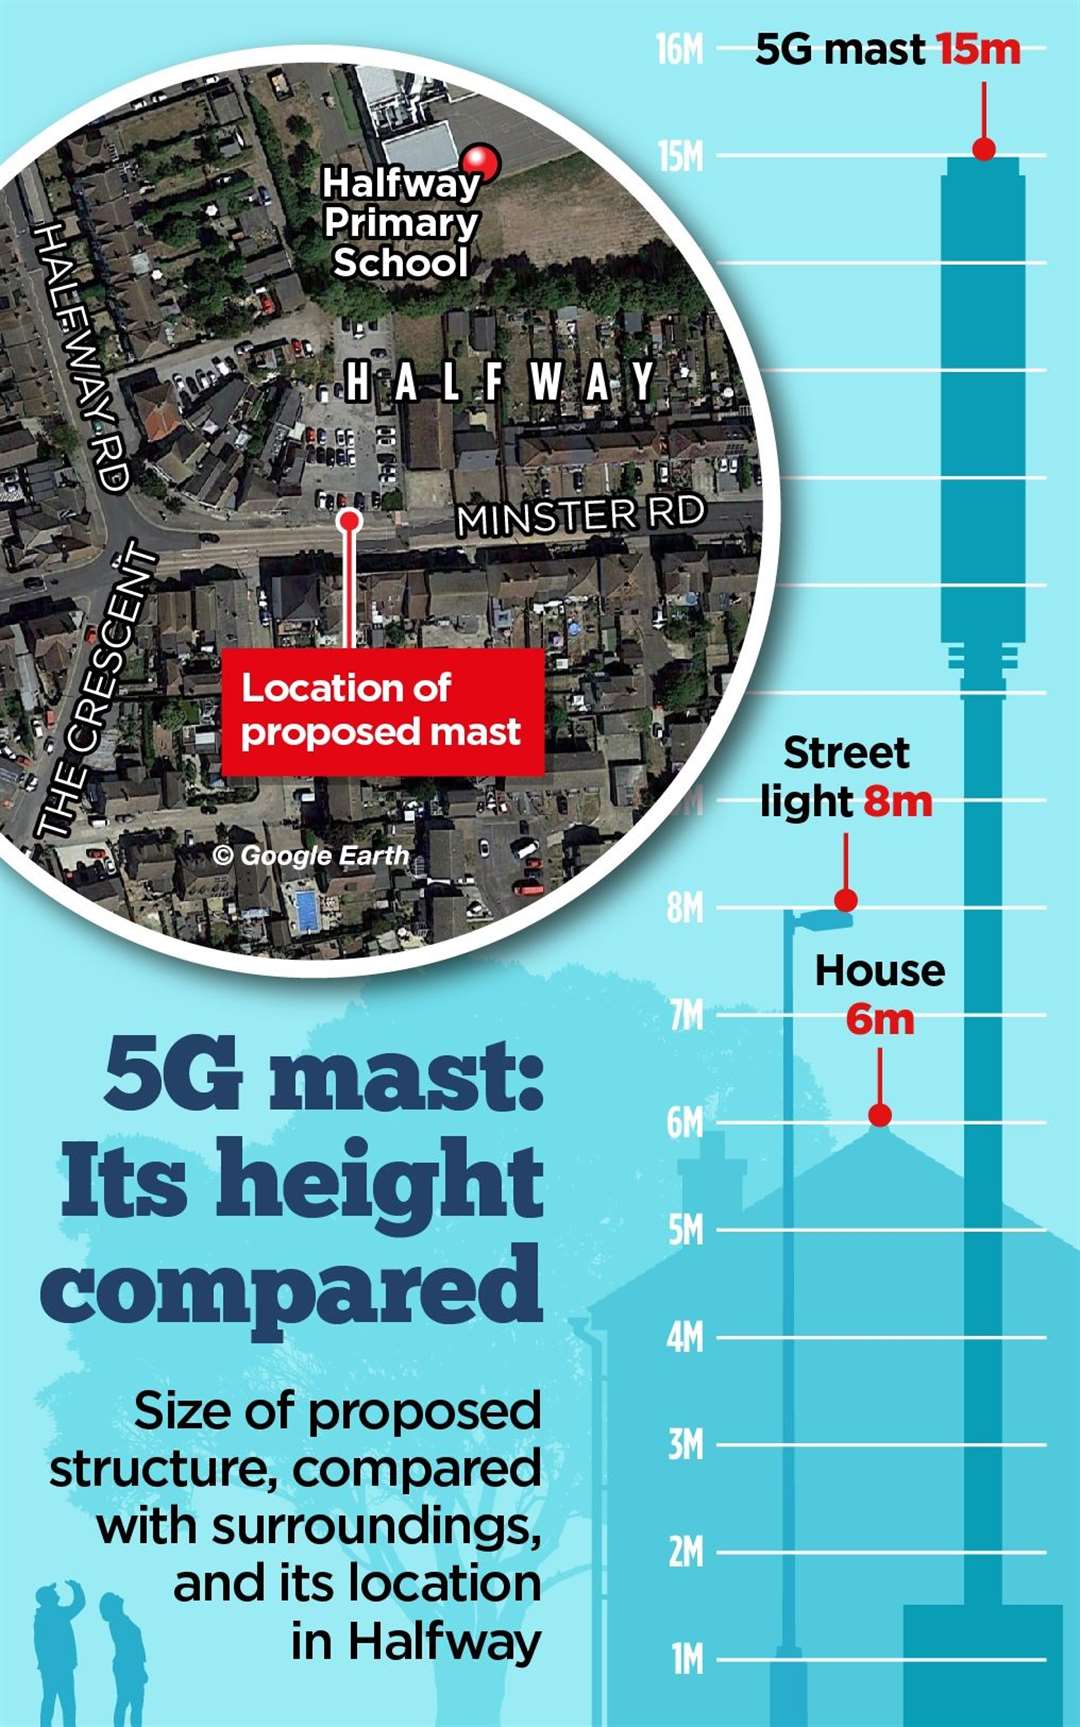 The proposed mast is directly next to Halfway Houses Primary School